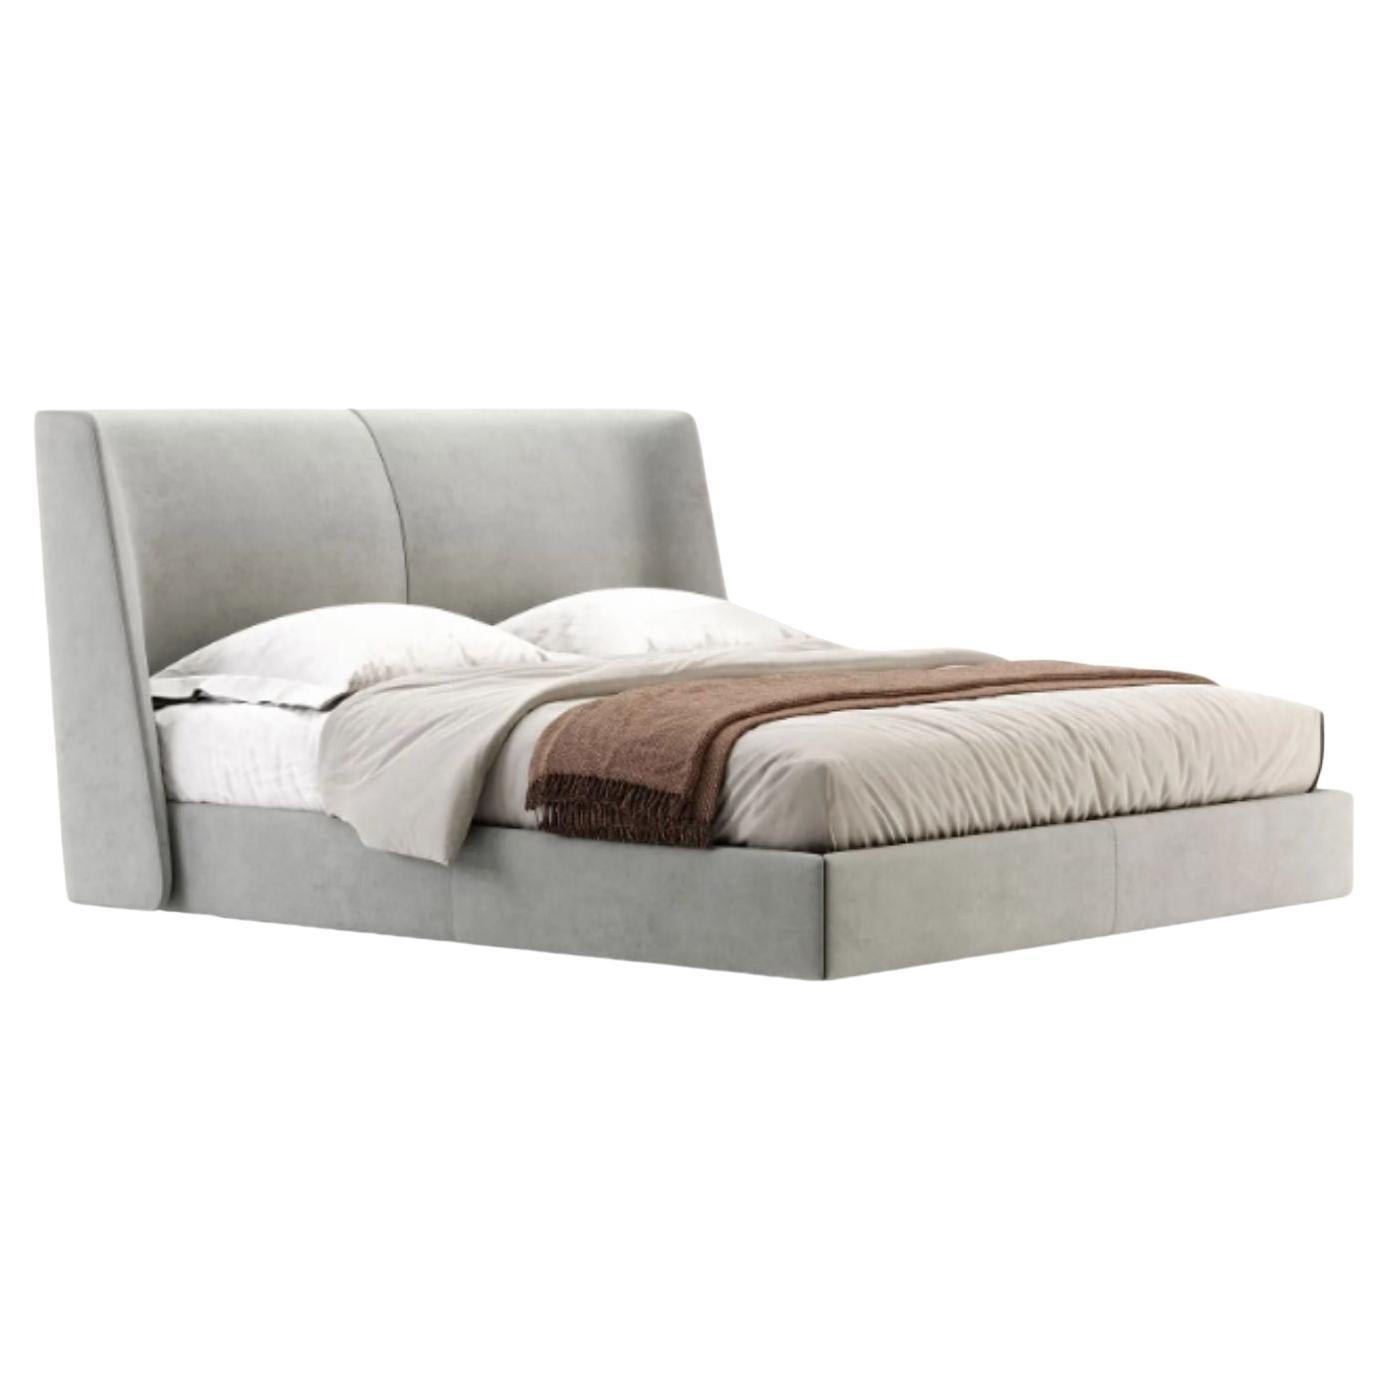 King Size Echo Bed by Domkapa For Sale